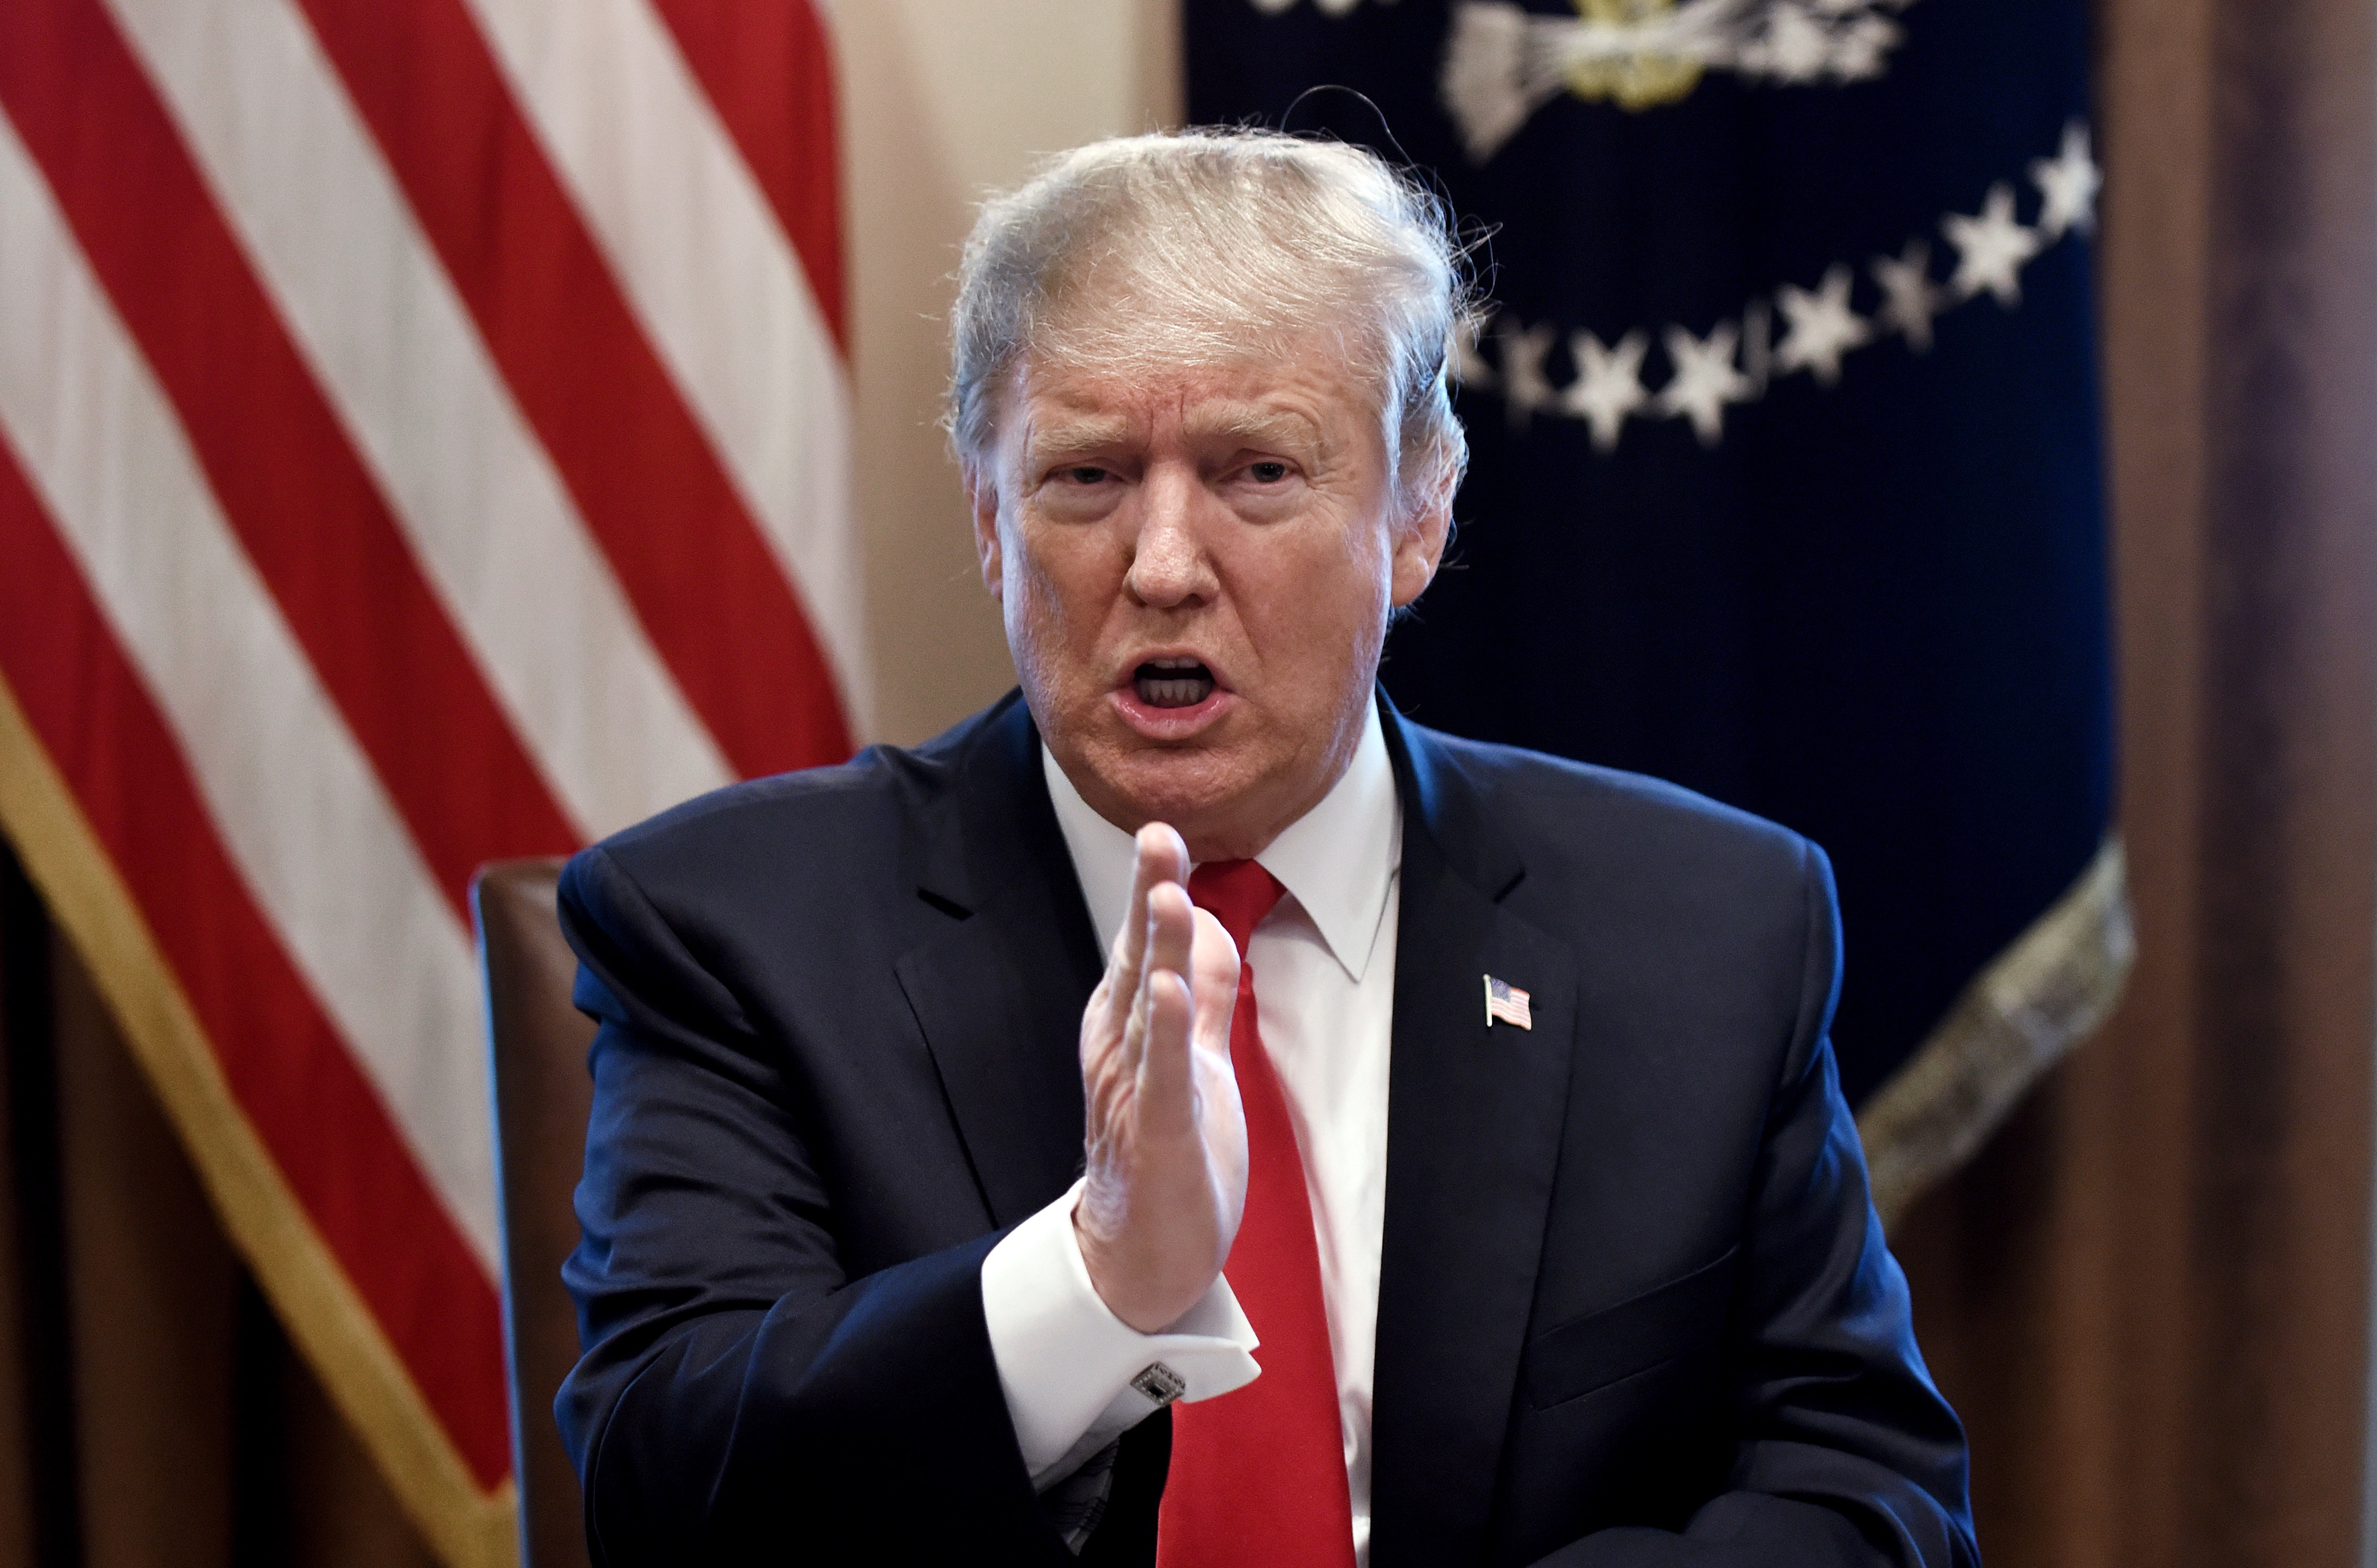 epa07336898 US President Donald J. Trump gestures during a meeting to discuss fighting human trafficking on the southern border in the Cabinet Room of the White House in Washington, DC, USA, 01 February 2019.  EPA/OLIVIER DOULIERY